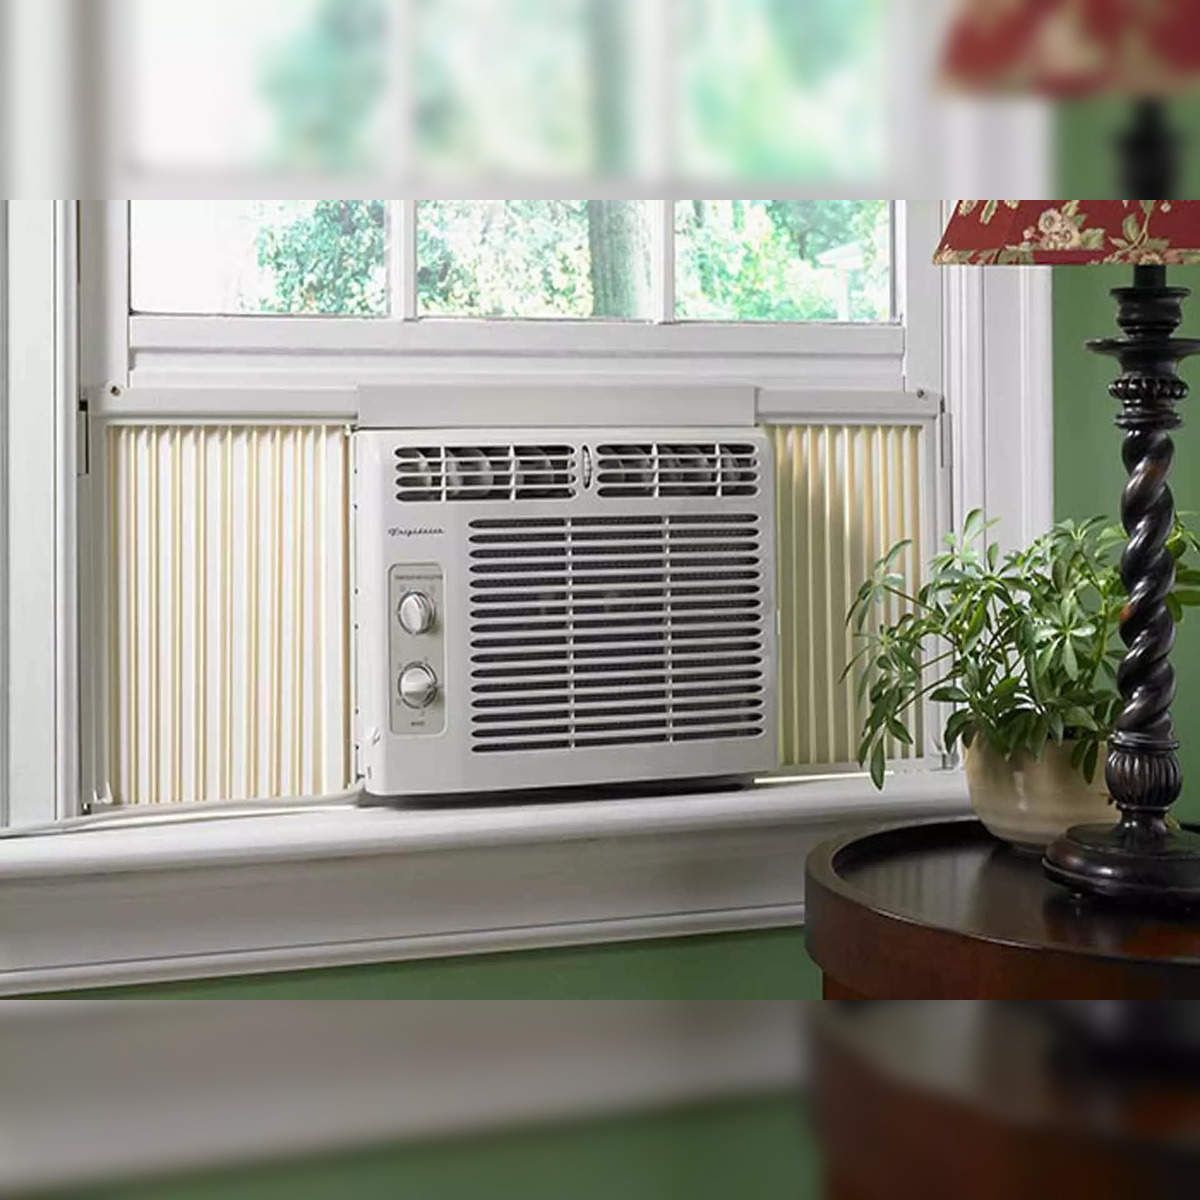 The 6 best air conditioners